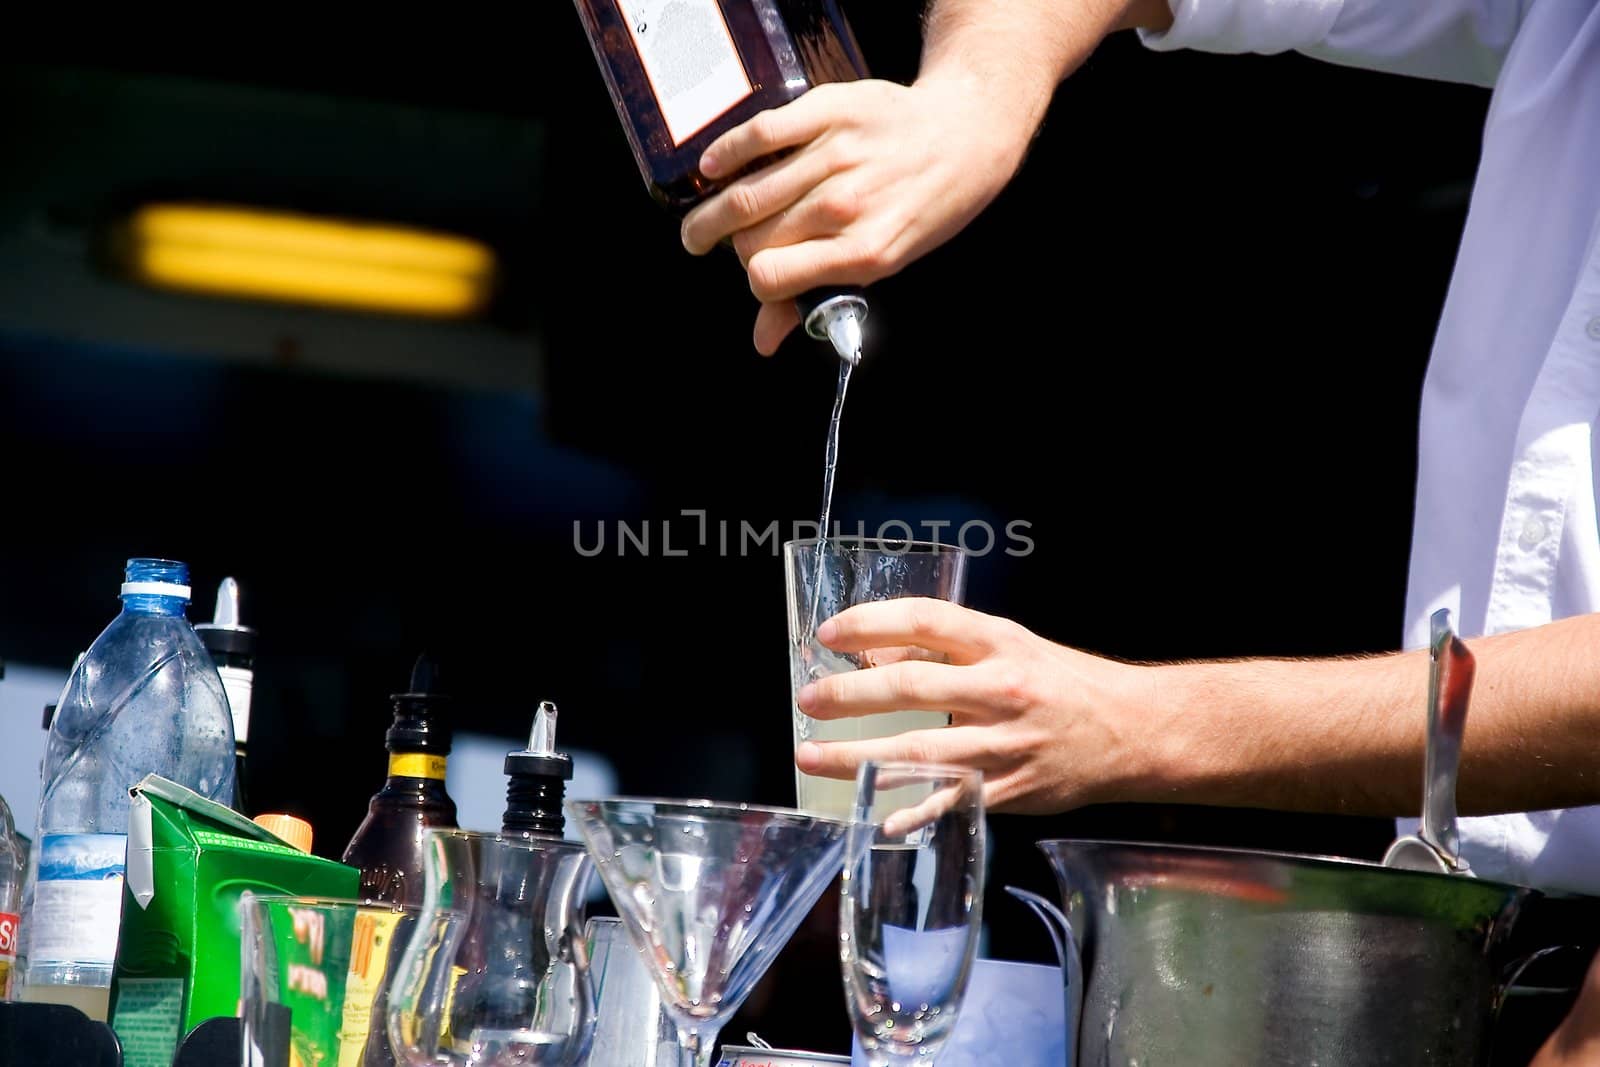 Hands of the barman mixing an alcoholic cocktail